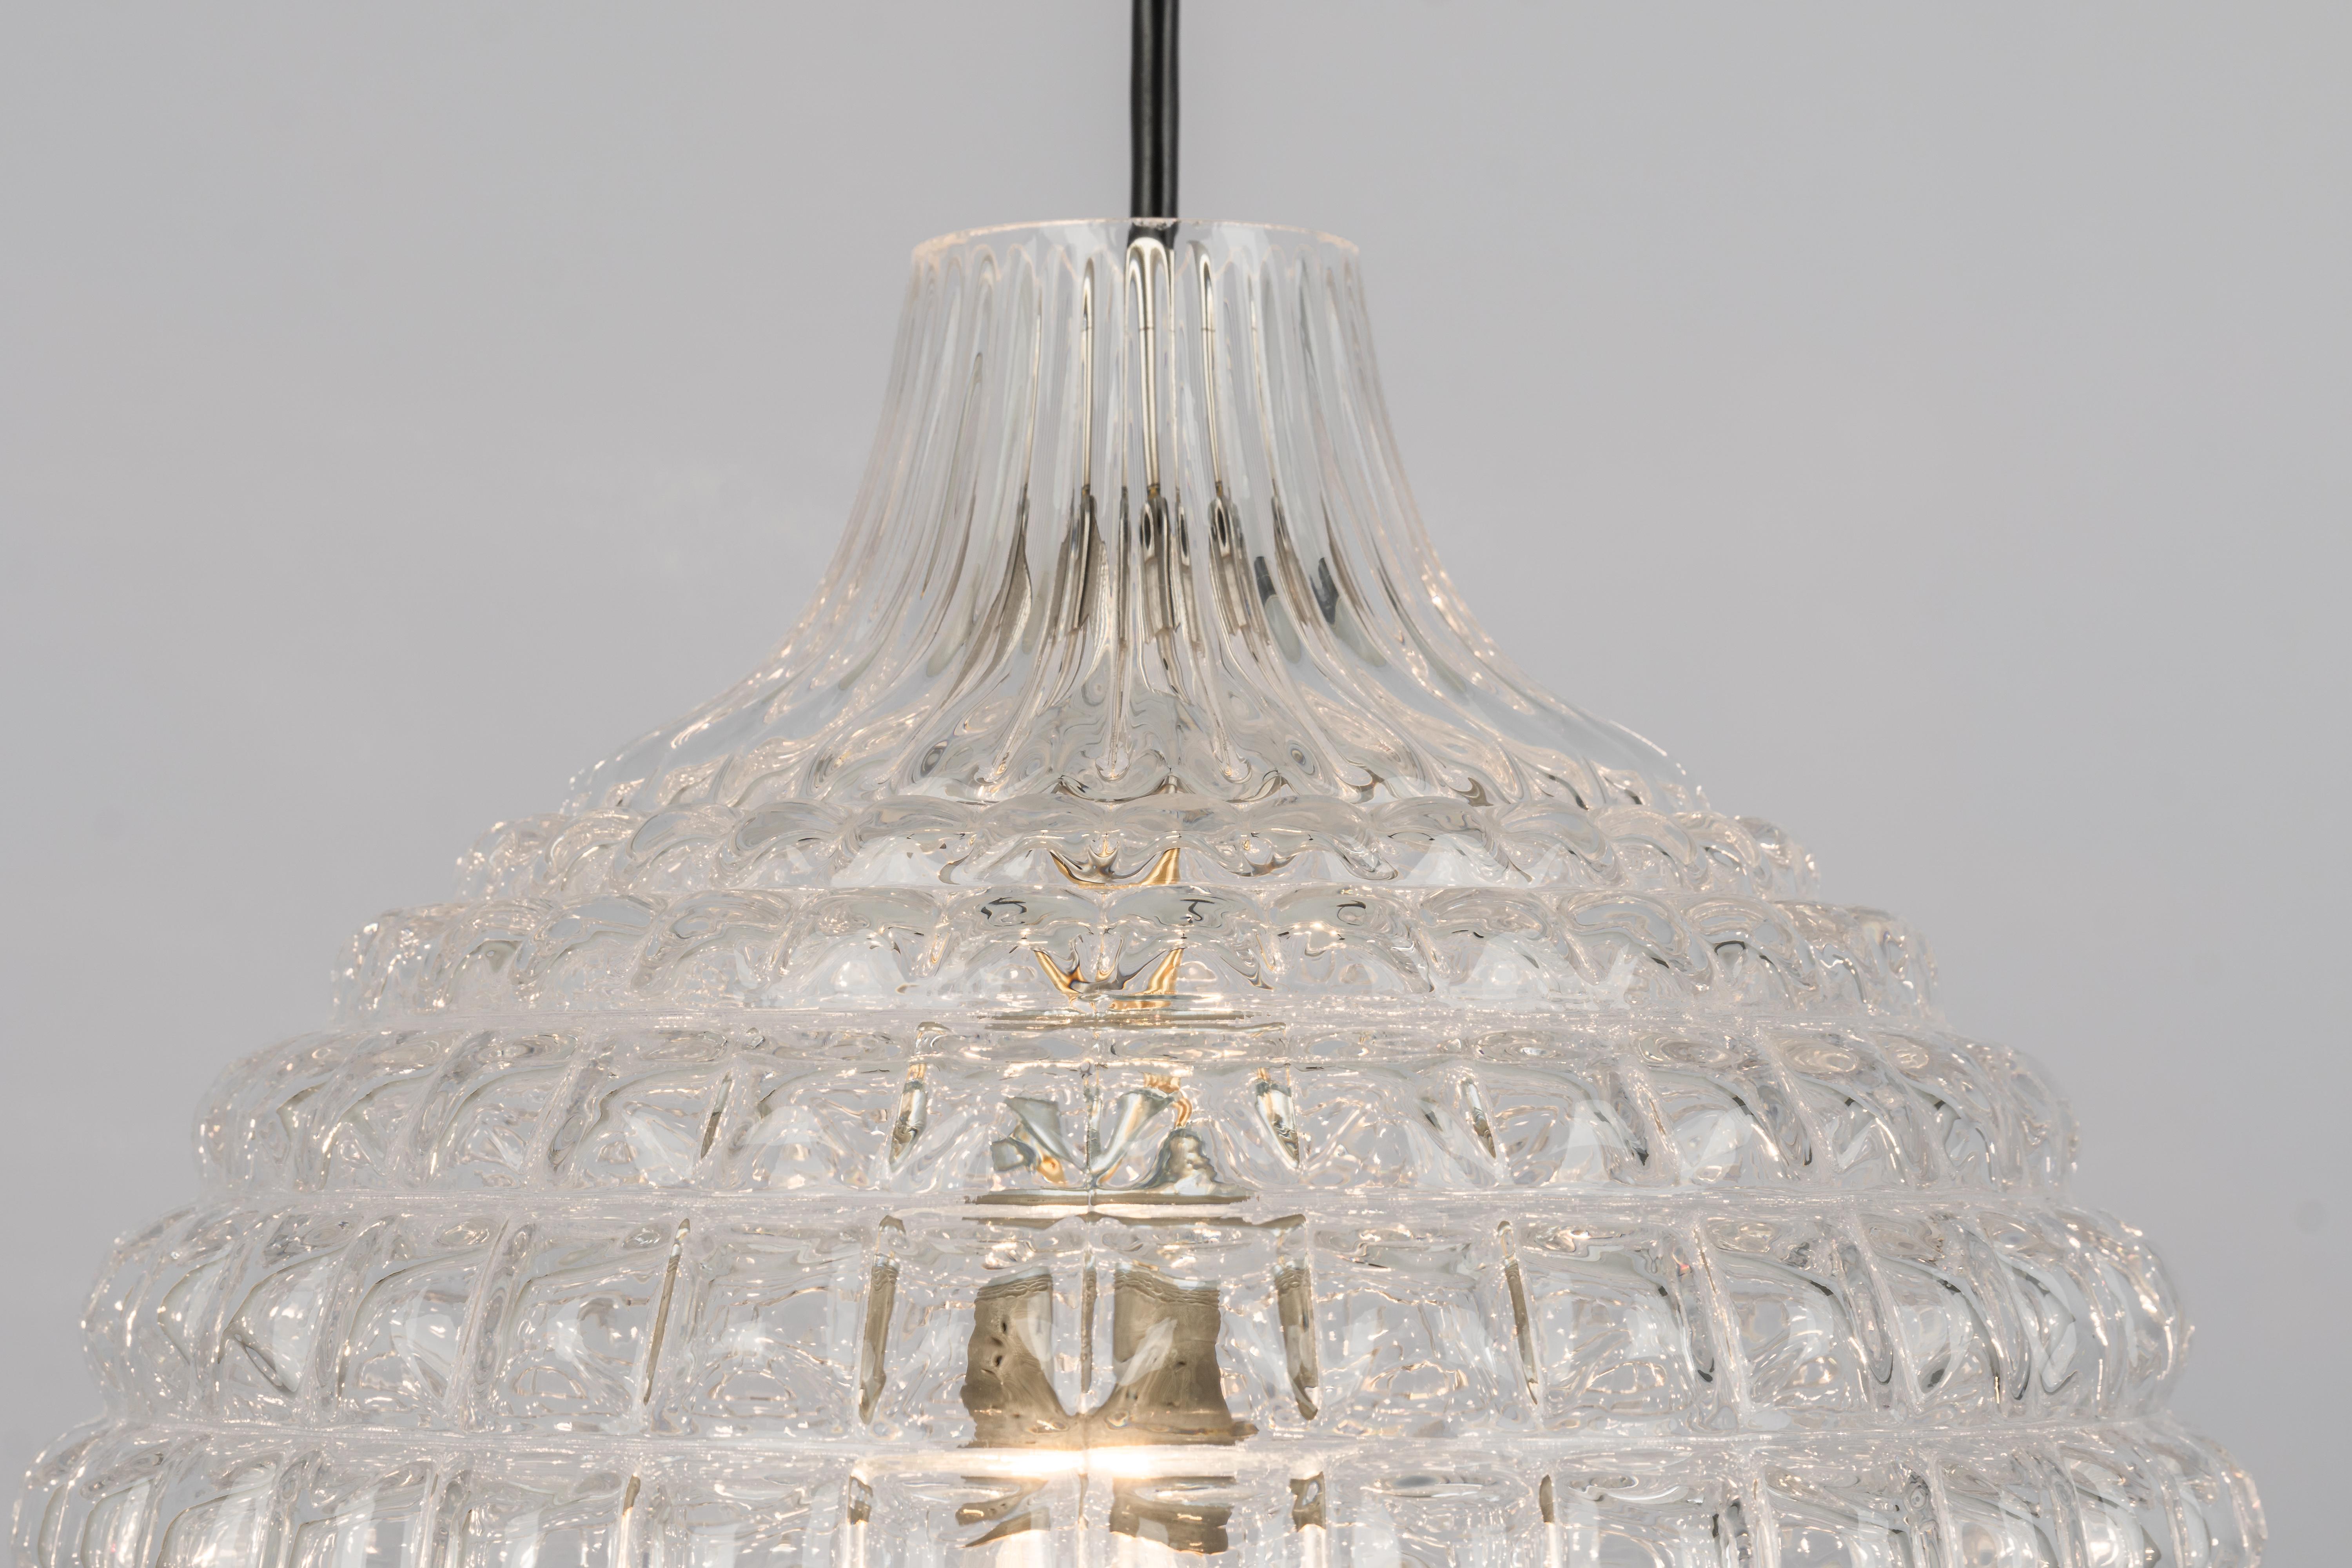 1 of 2 Stunning Crystal Glass Pendant Light, Peill & Putzler, Germany, 1970s For Sale 9